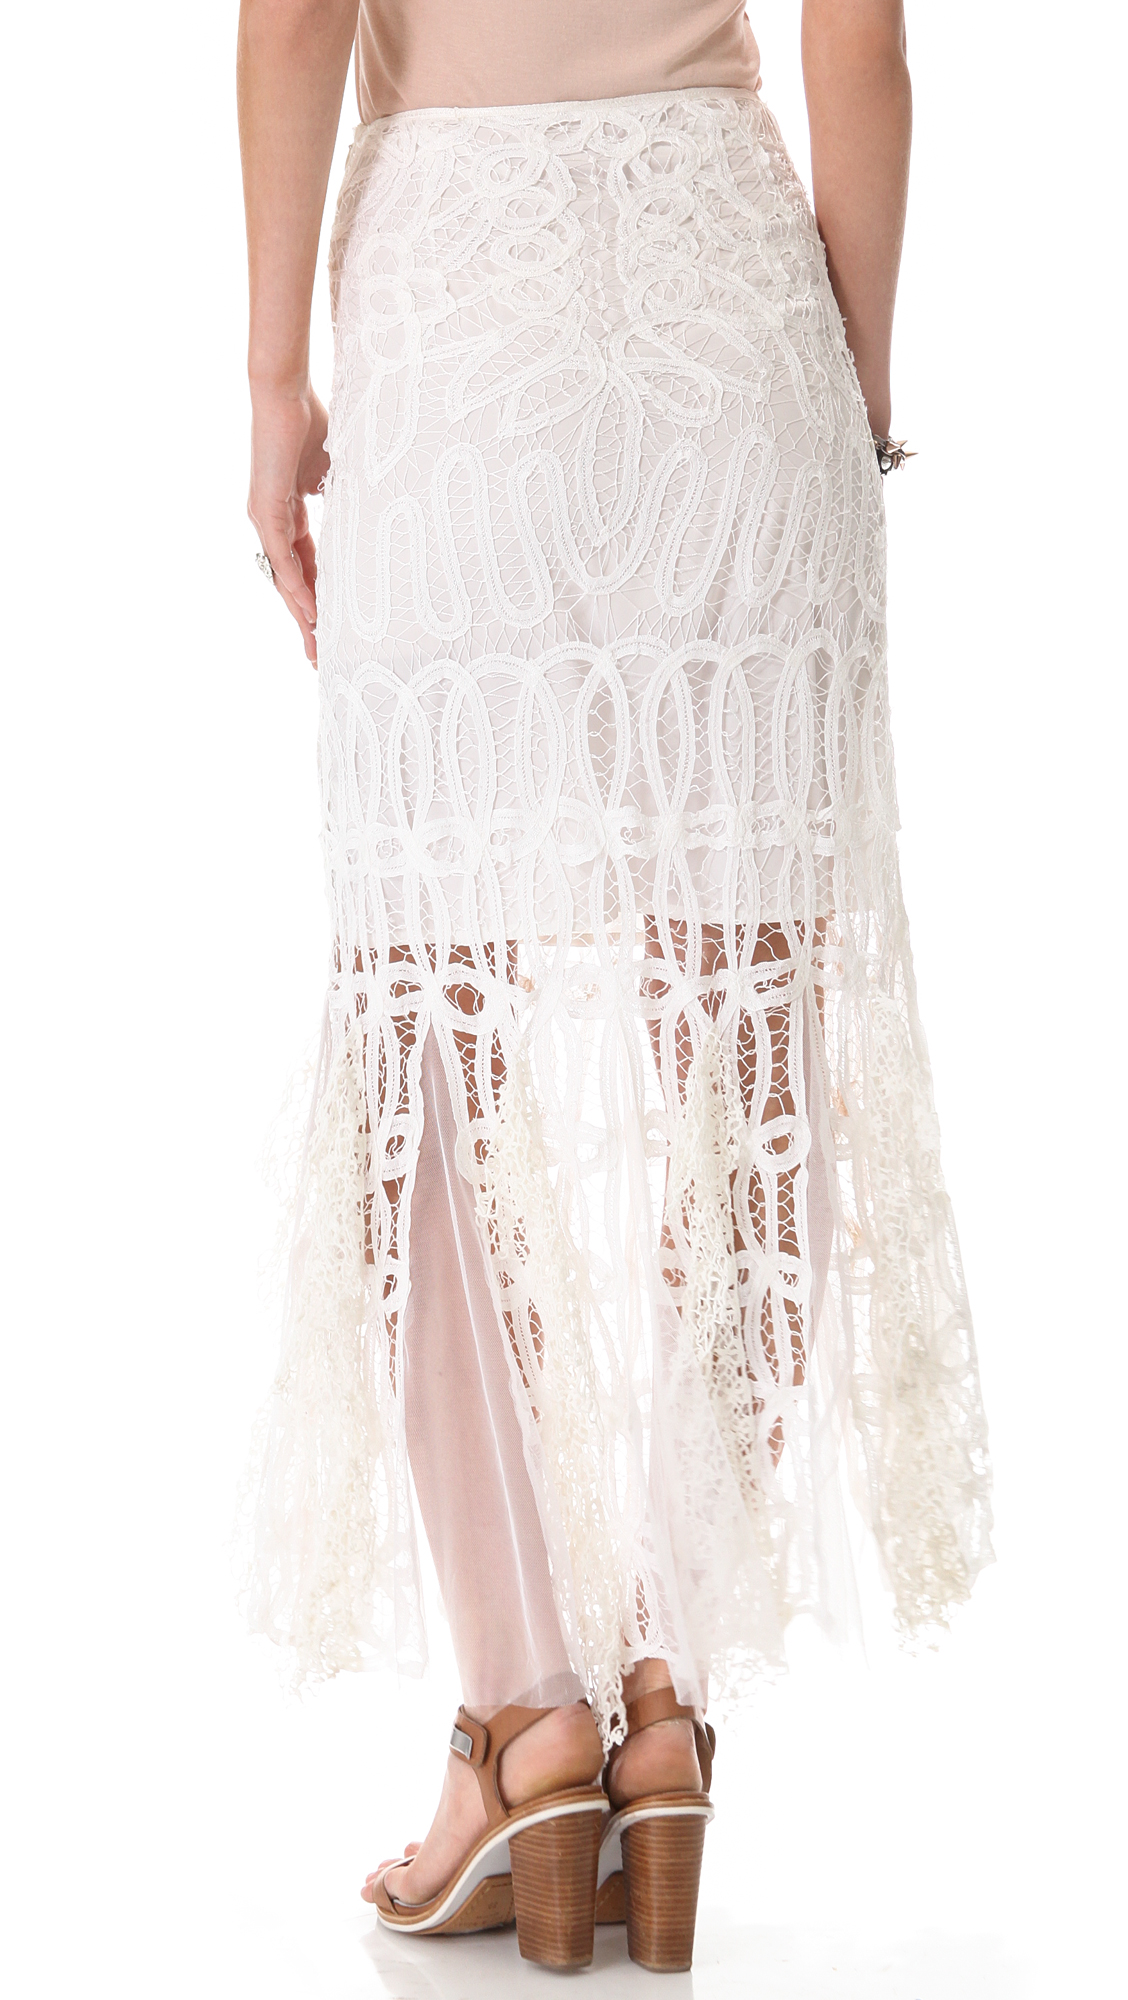 Free People Pieced Lace Maxi Skirt in White - Lyst